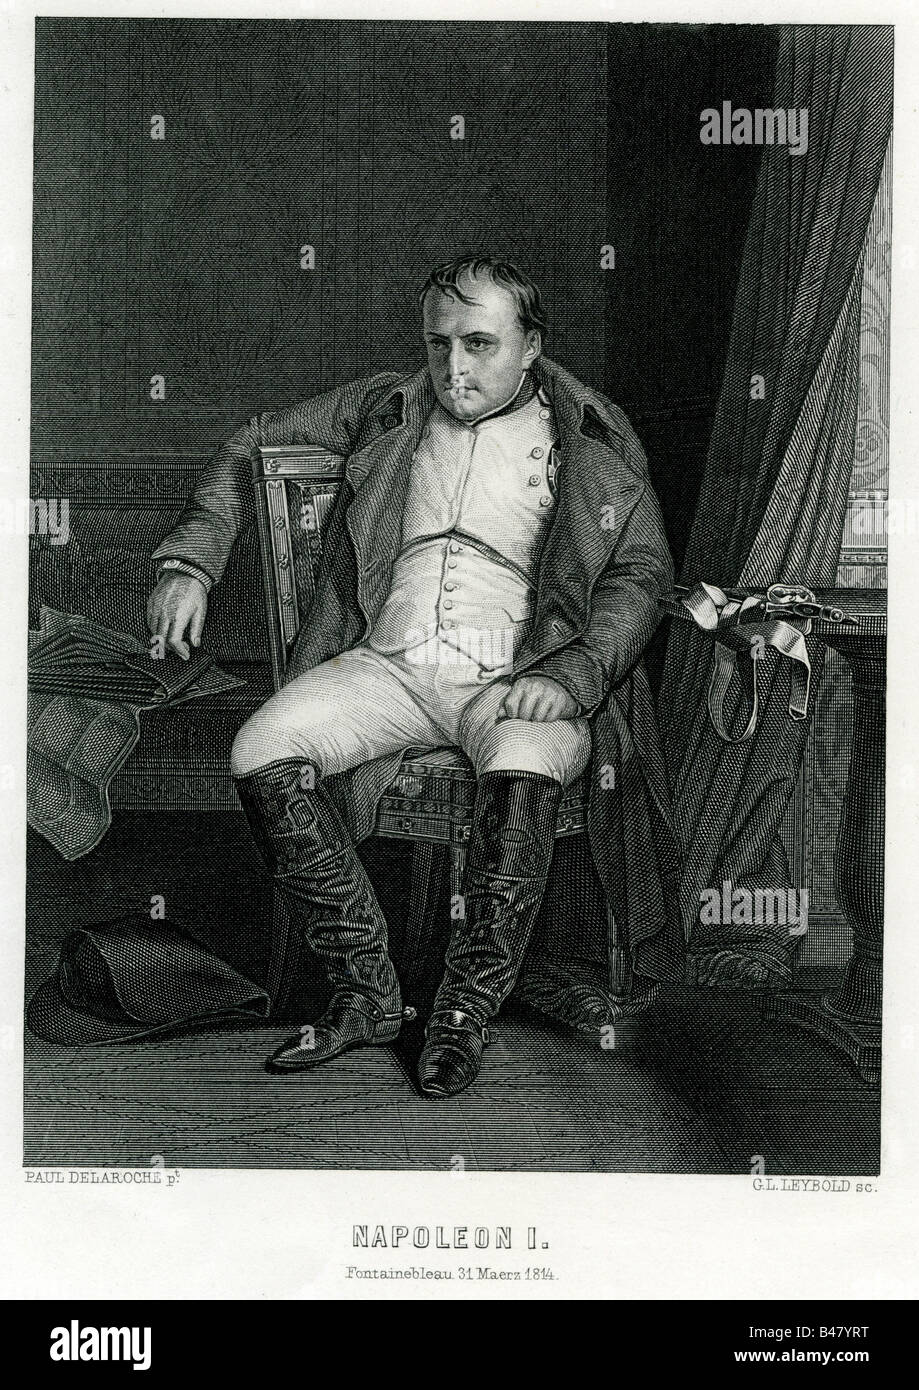 Napoleon I, 15.8.1769 - 5.5. 1821, Emperor of the French 1804 - 1815, half length, sitting, in Fonteinebleau, 31.3.1814, copper engraving by G. L. Leybold after painting by Paul Delaroche, 1814, Artist's Copyright has not to be cleared Stock Photo